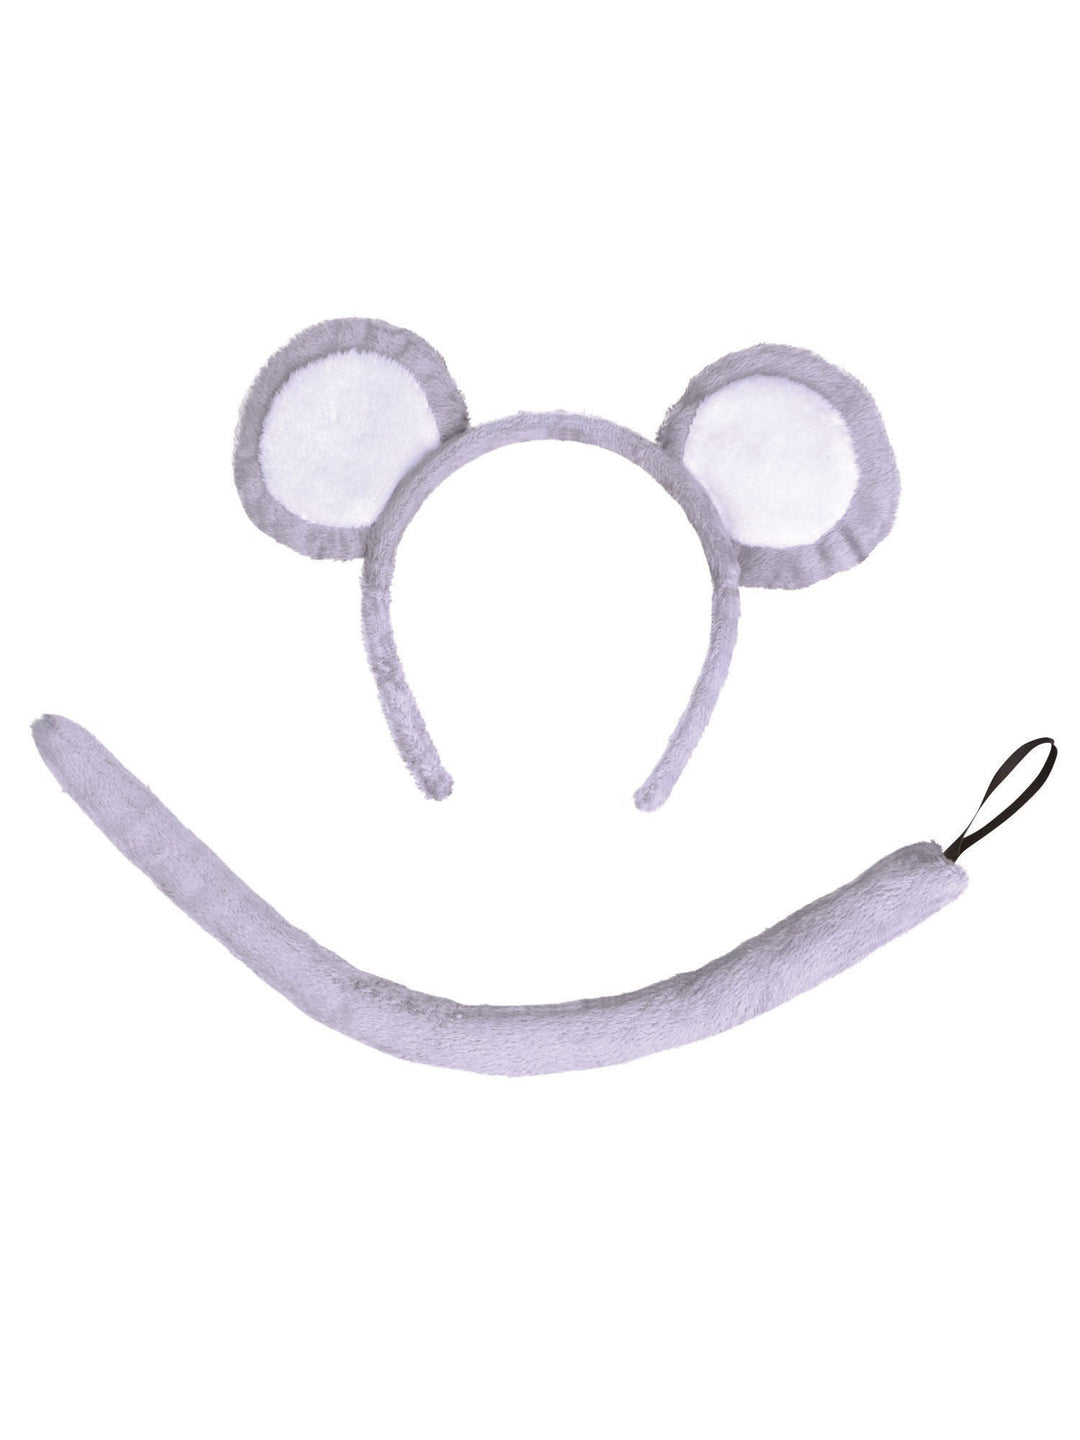 Size Chart Mouse Set Grey Ears with Tail Kids Costume Kit Instant Disguise